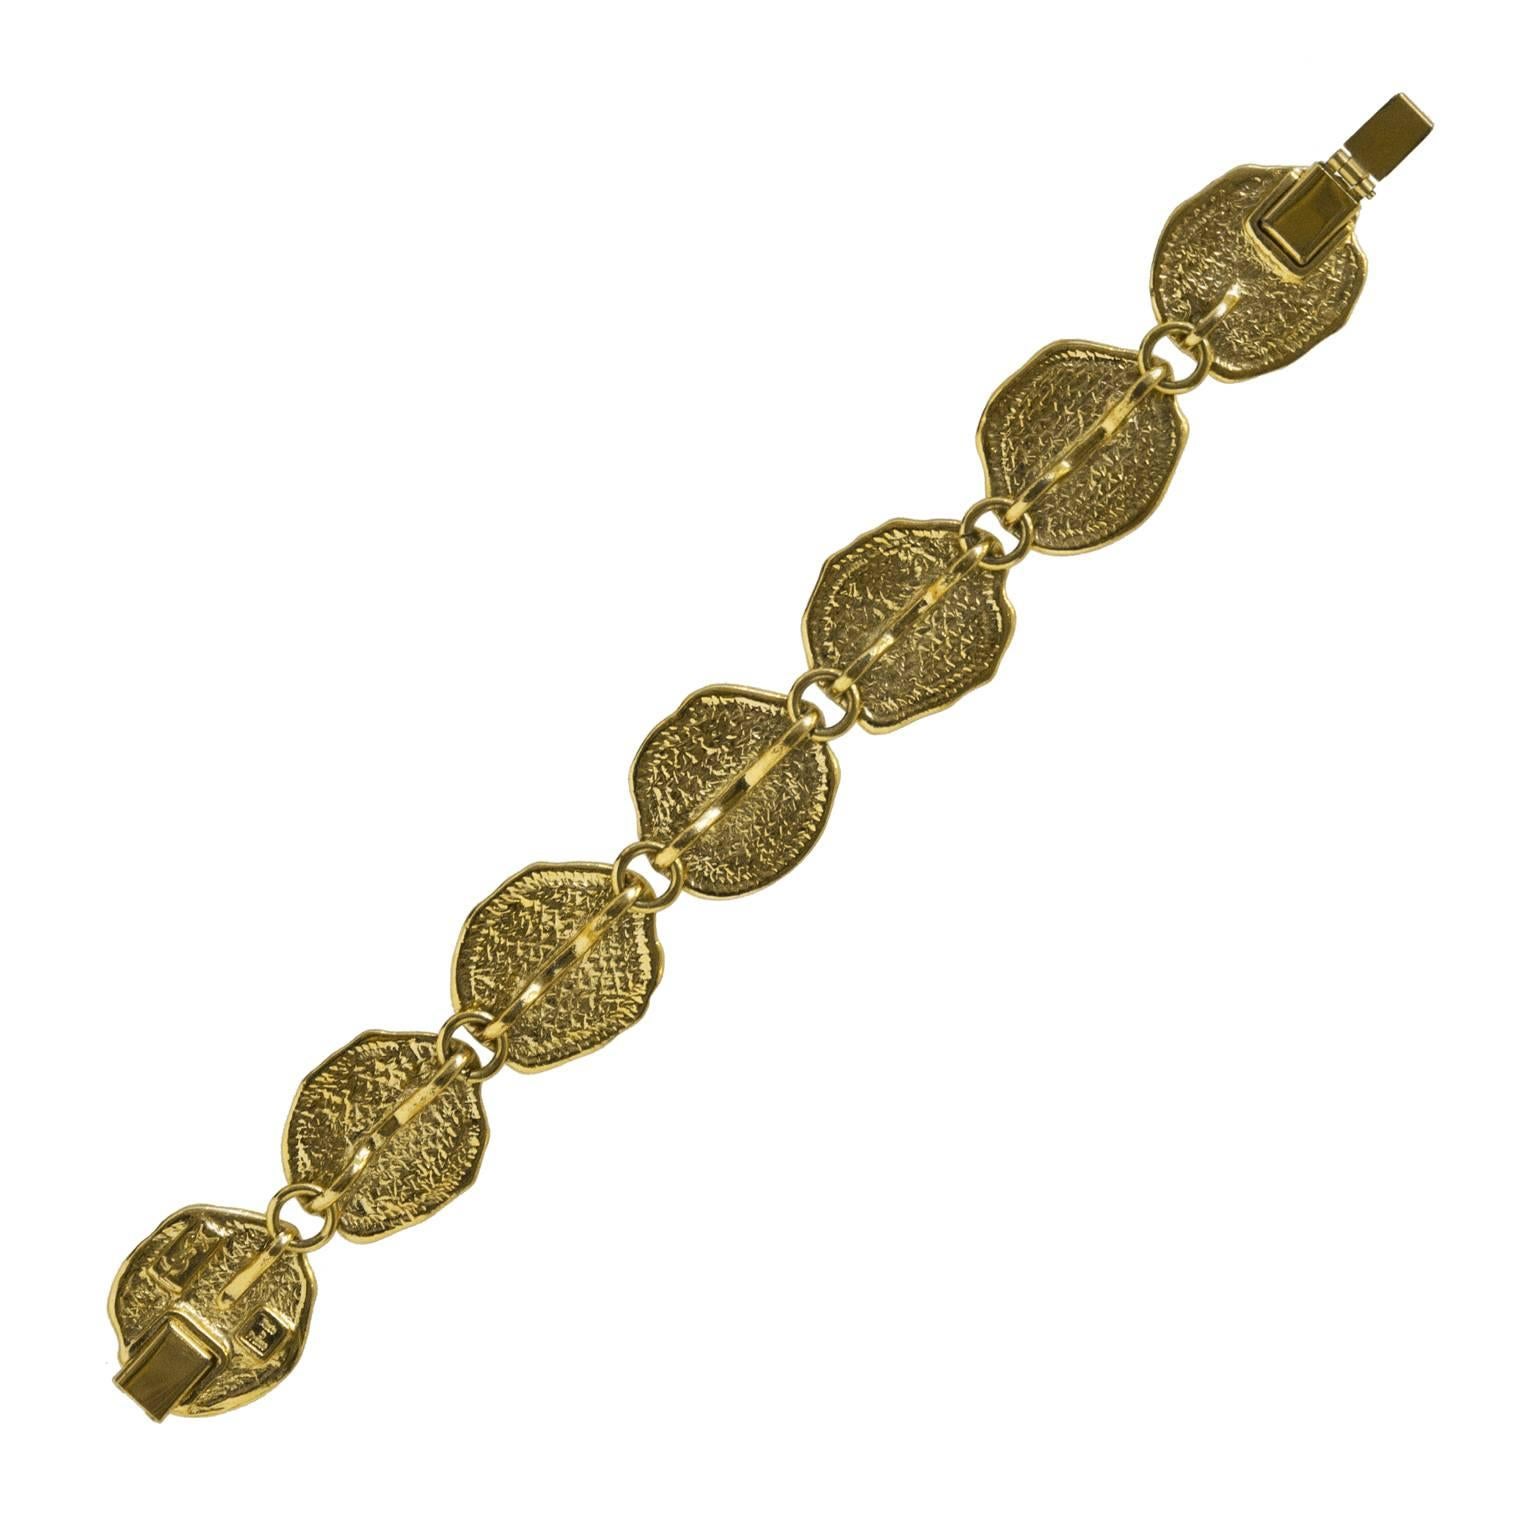 Yves Saint Laurent 1980's gold plated medallion link bracelet. The medallions feature abstract fossilized impressions of scrolls and the profile of a head. Signed YSL and made in France. Tab inset clasp. In excellent condition. 